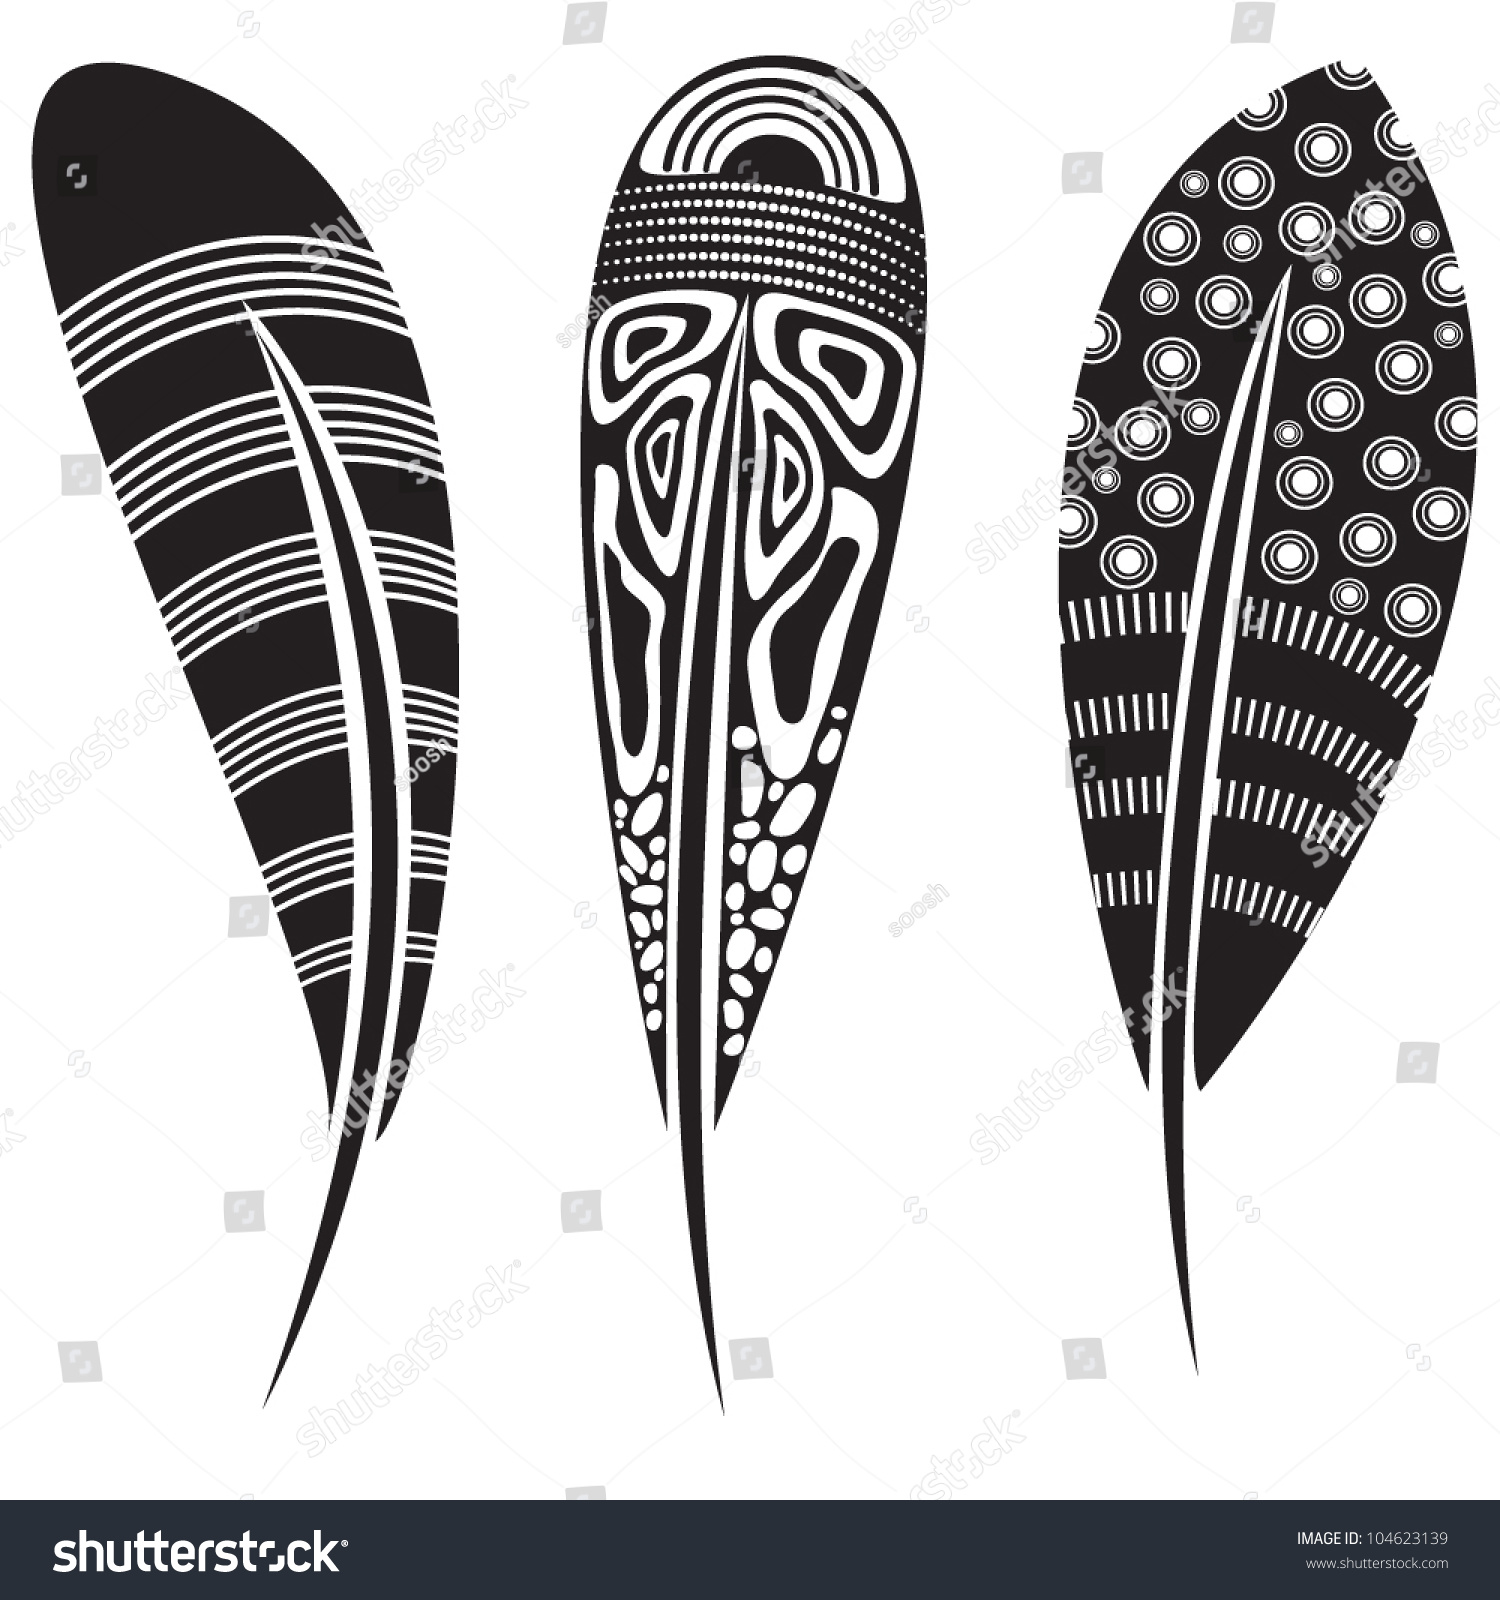 Vector Illustration Feathers Tribal Ornaments Color Stock Vector ...